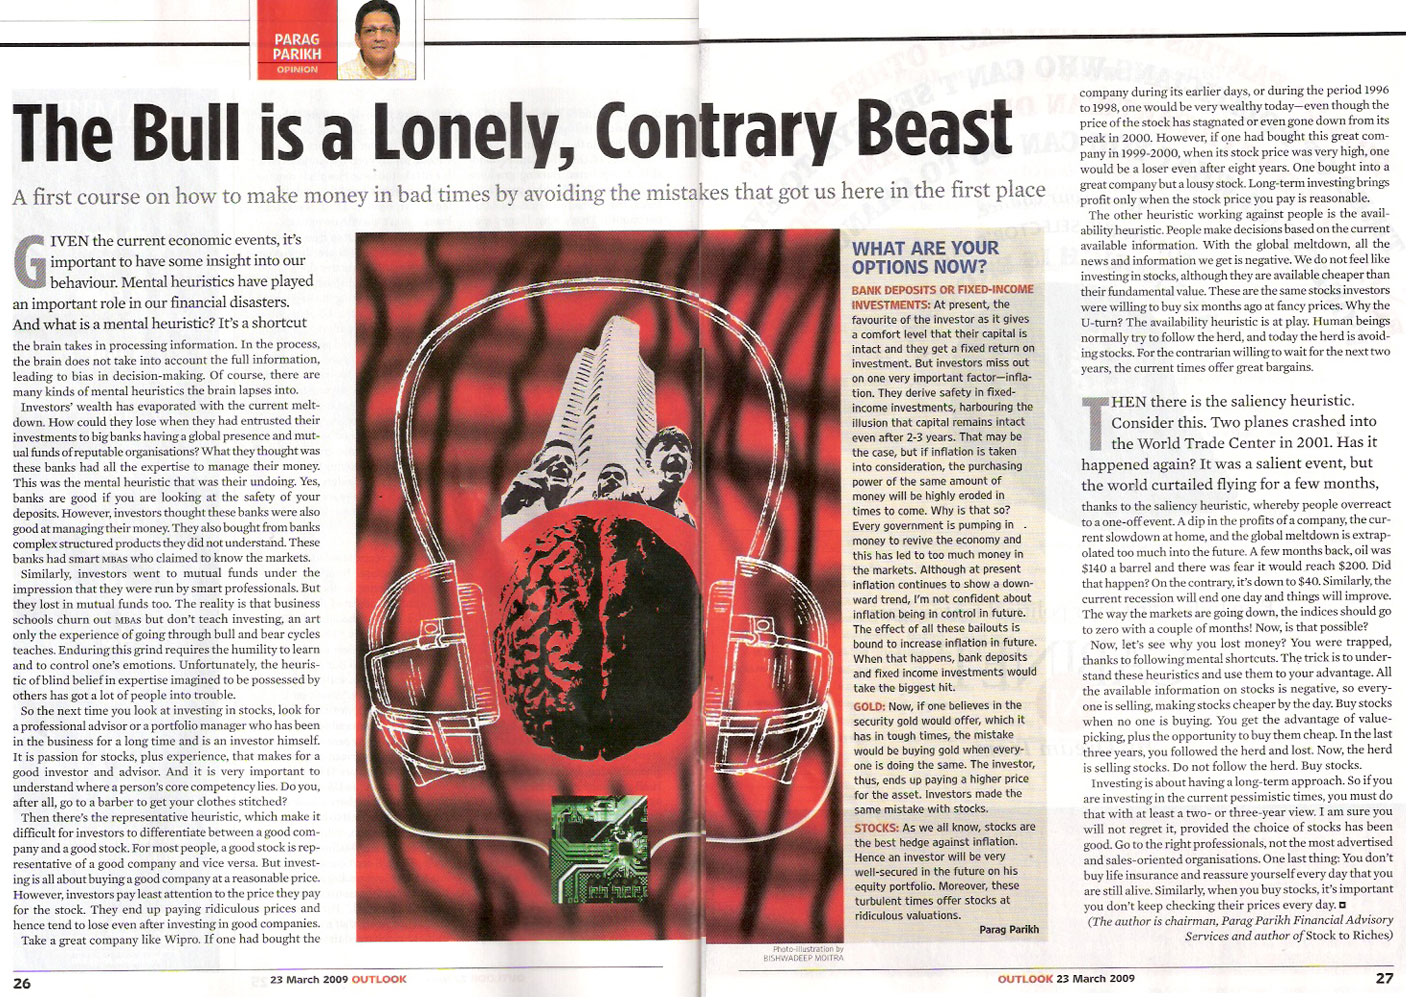 The Bull is Lonely, Contrary Beast - Parag Parikh